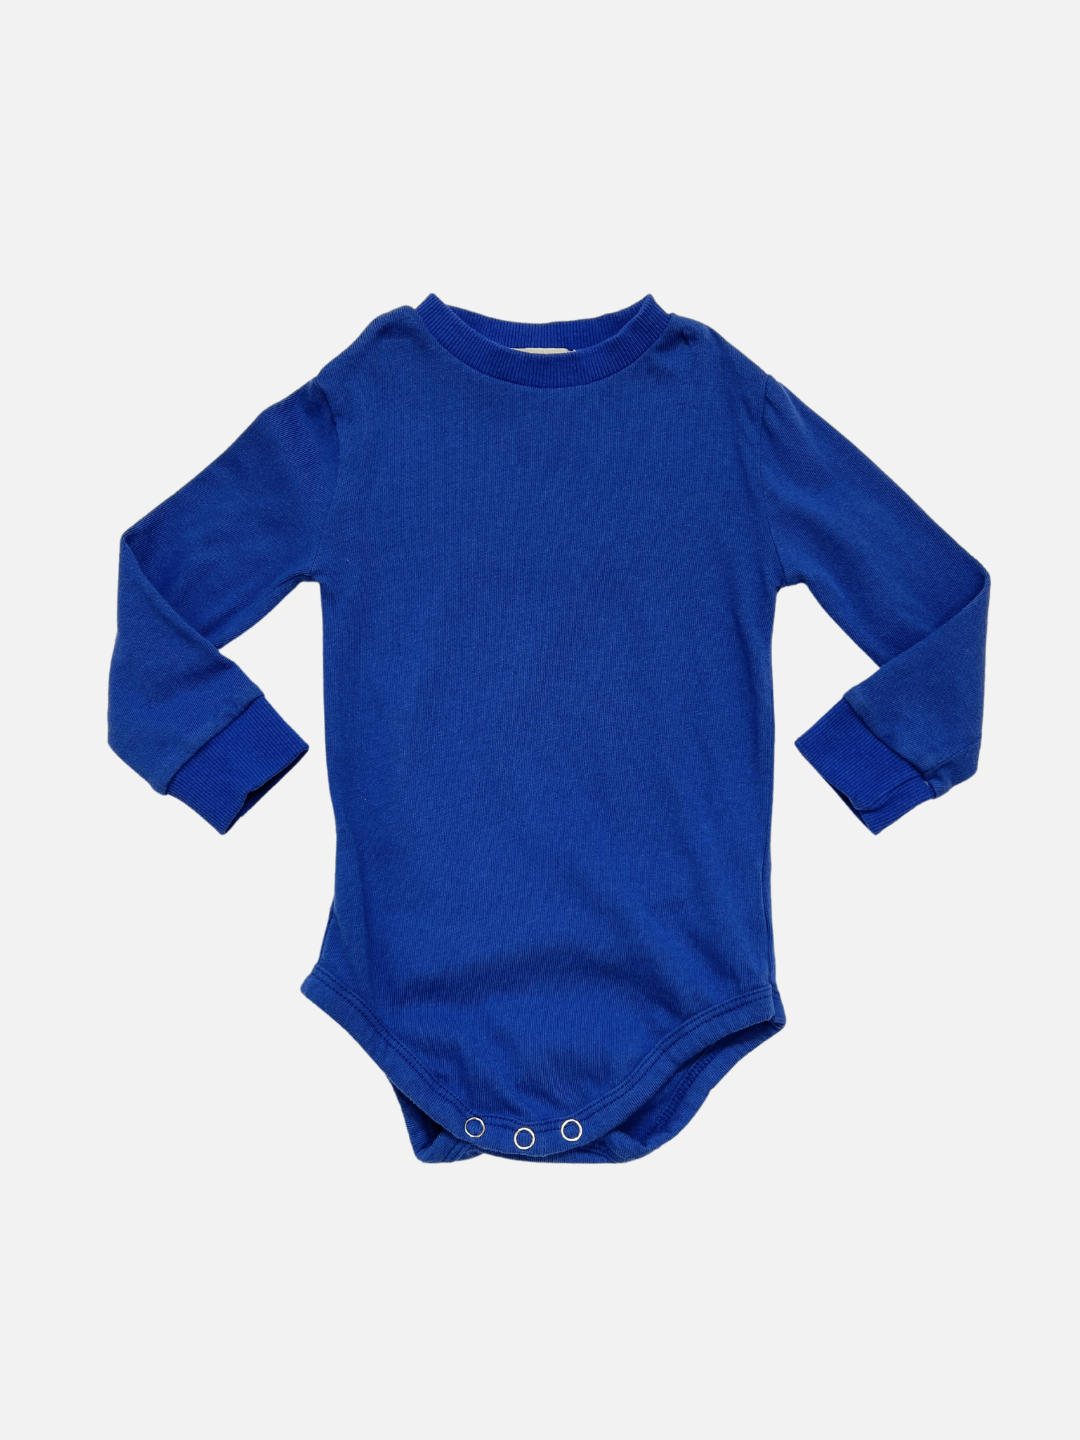 Front view of the patch onesie in Blue